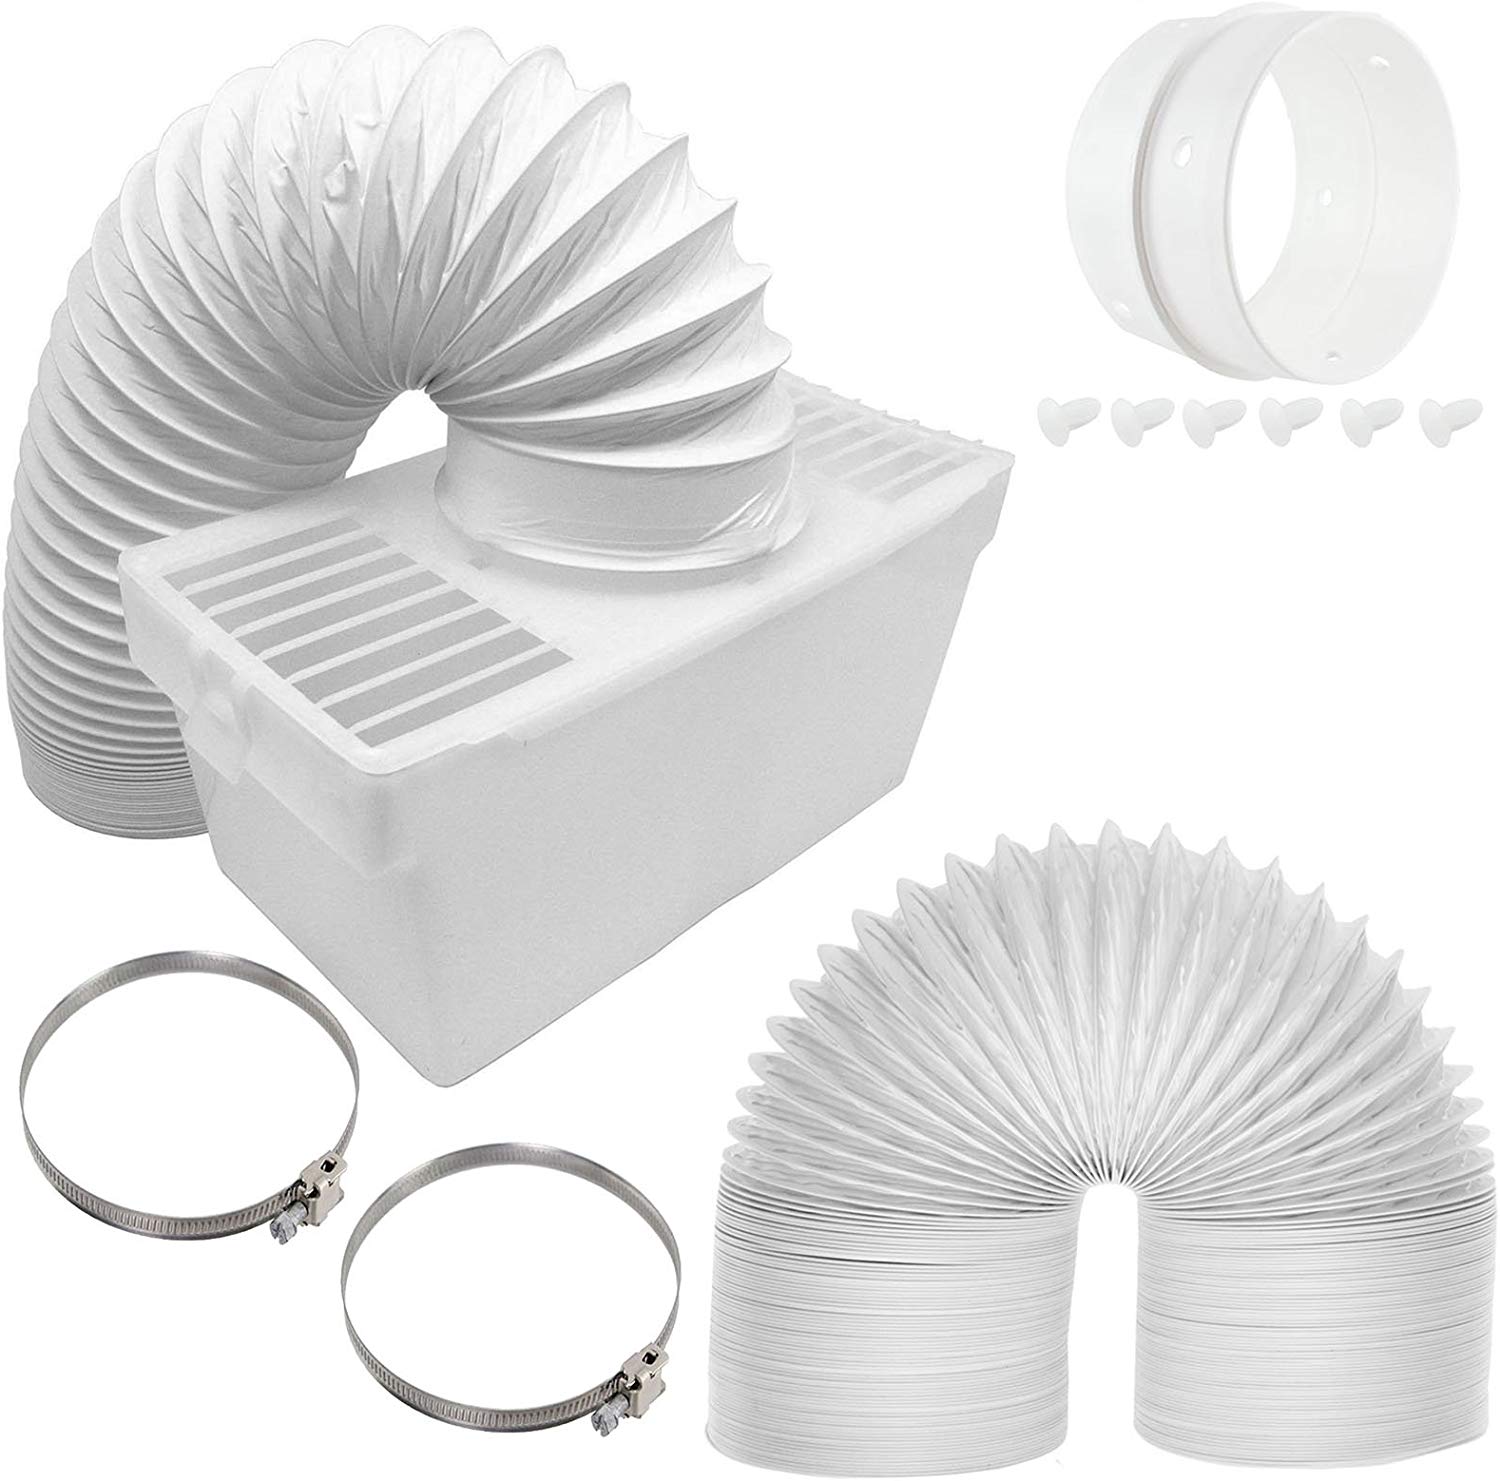 Universal Tumble Dryer Condenser Vent Box + Extra Long 6m Vent Hose Pipe (4" / 100mm)